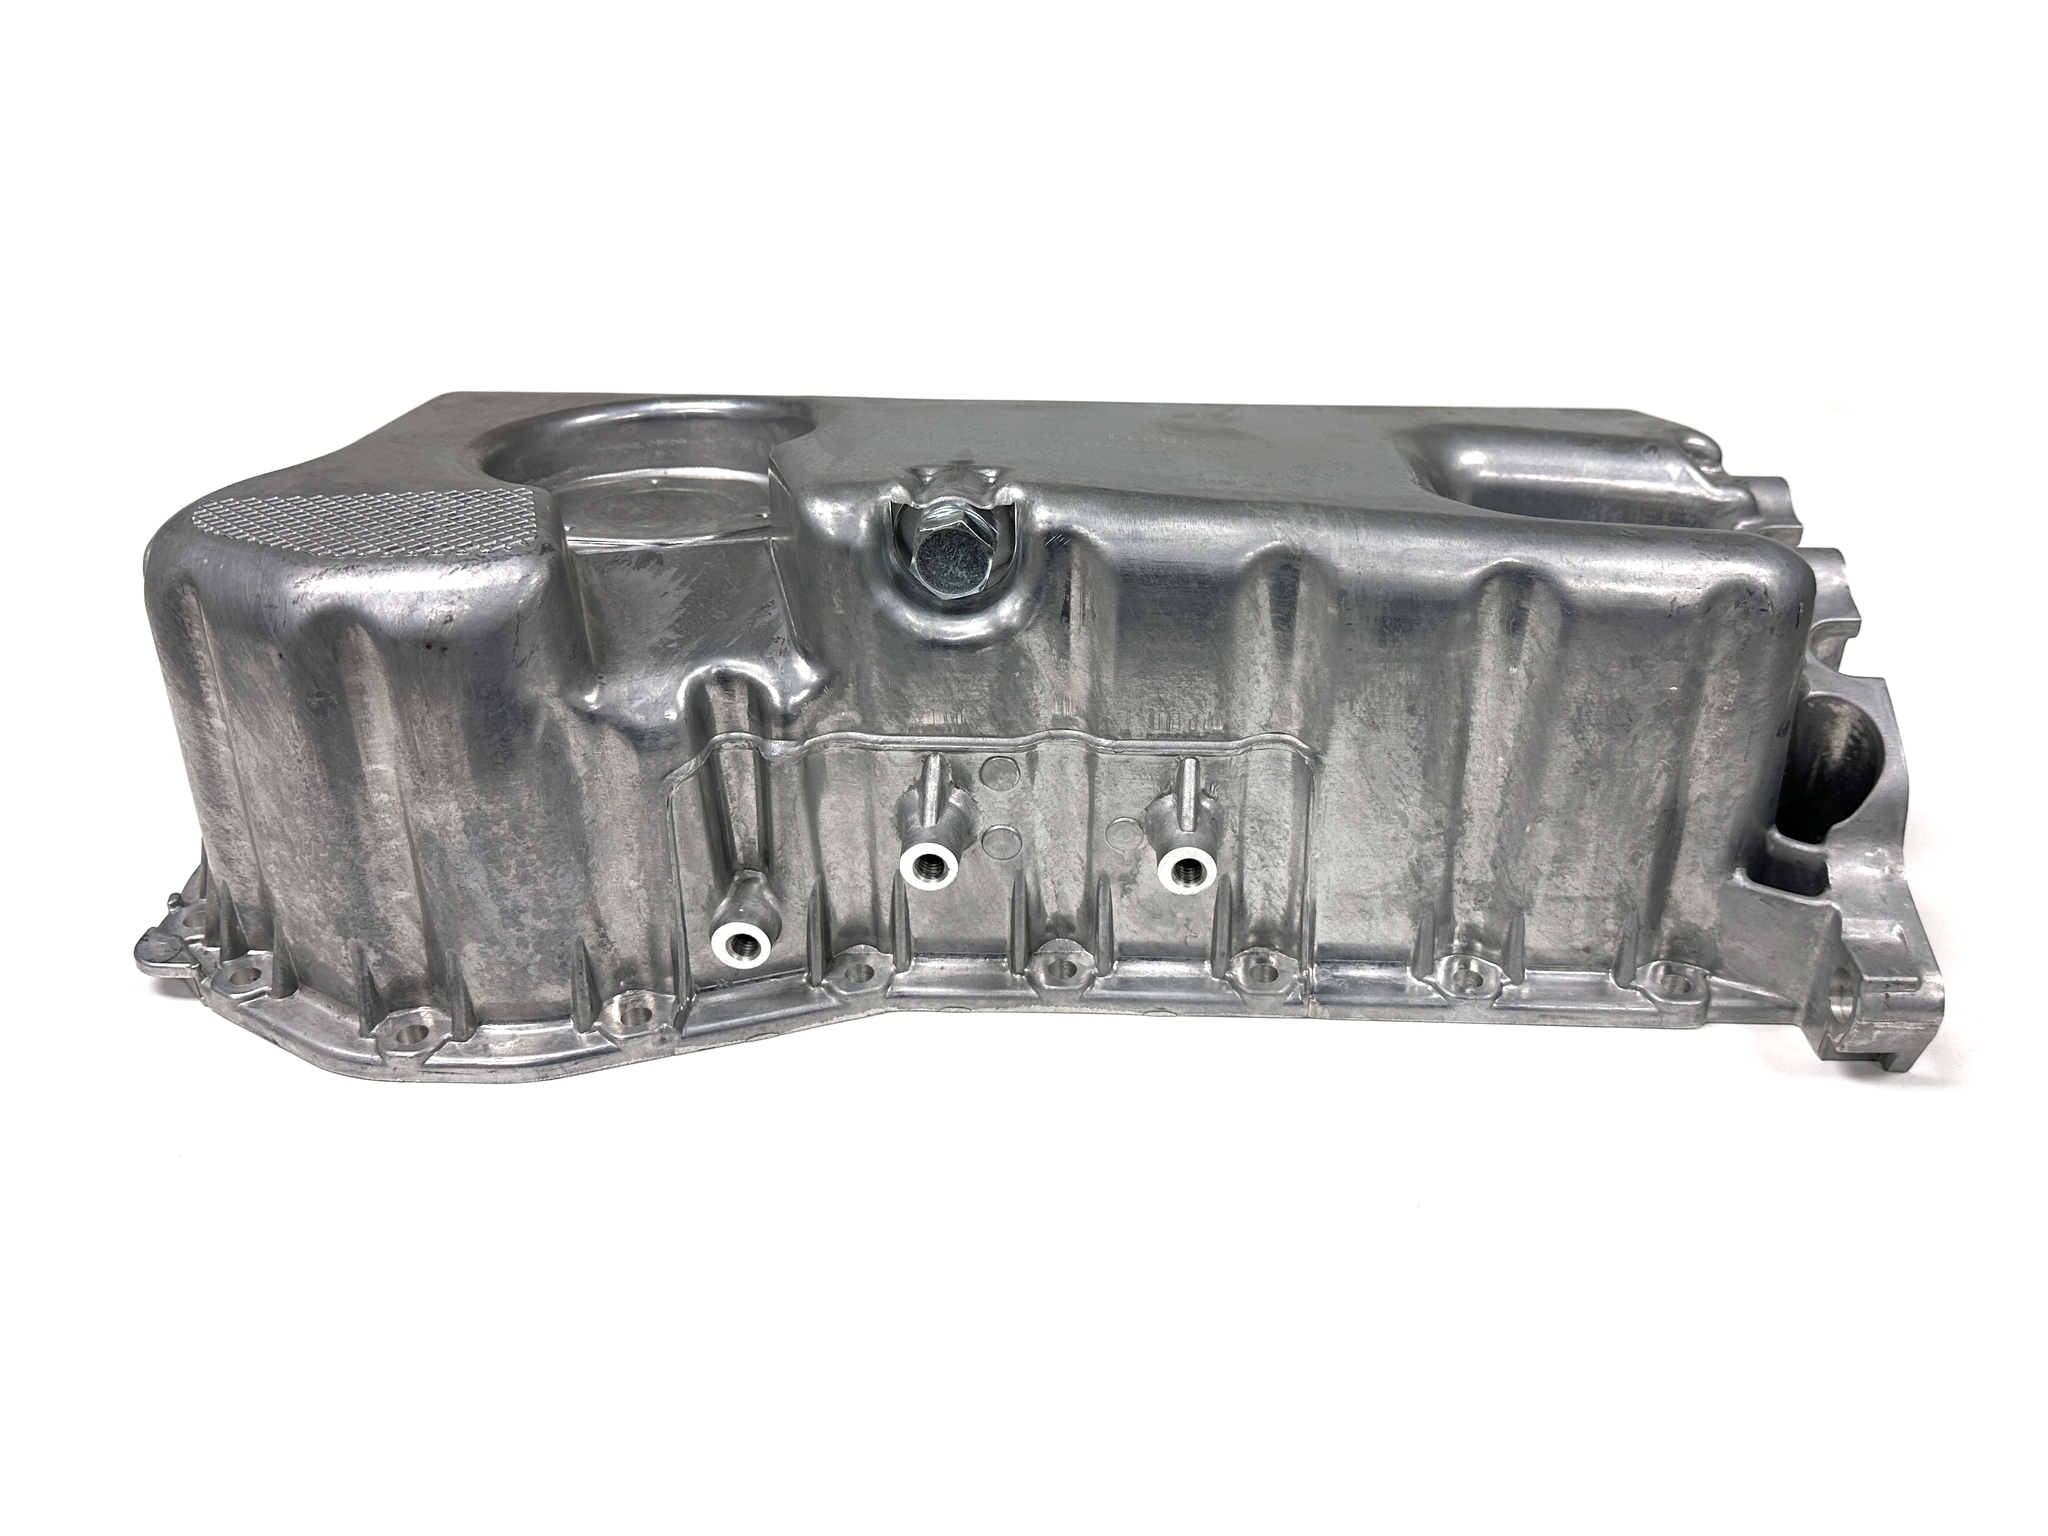 Aluminum oilpan for VW 4 cyl.